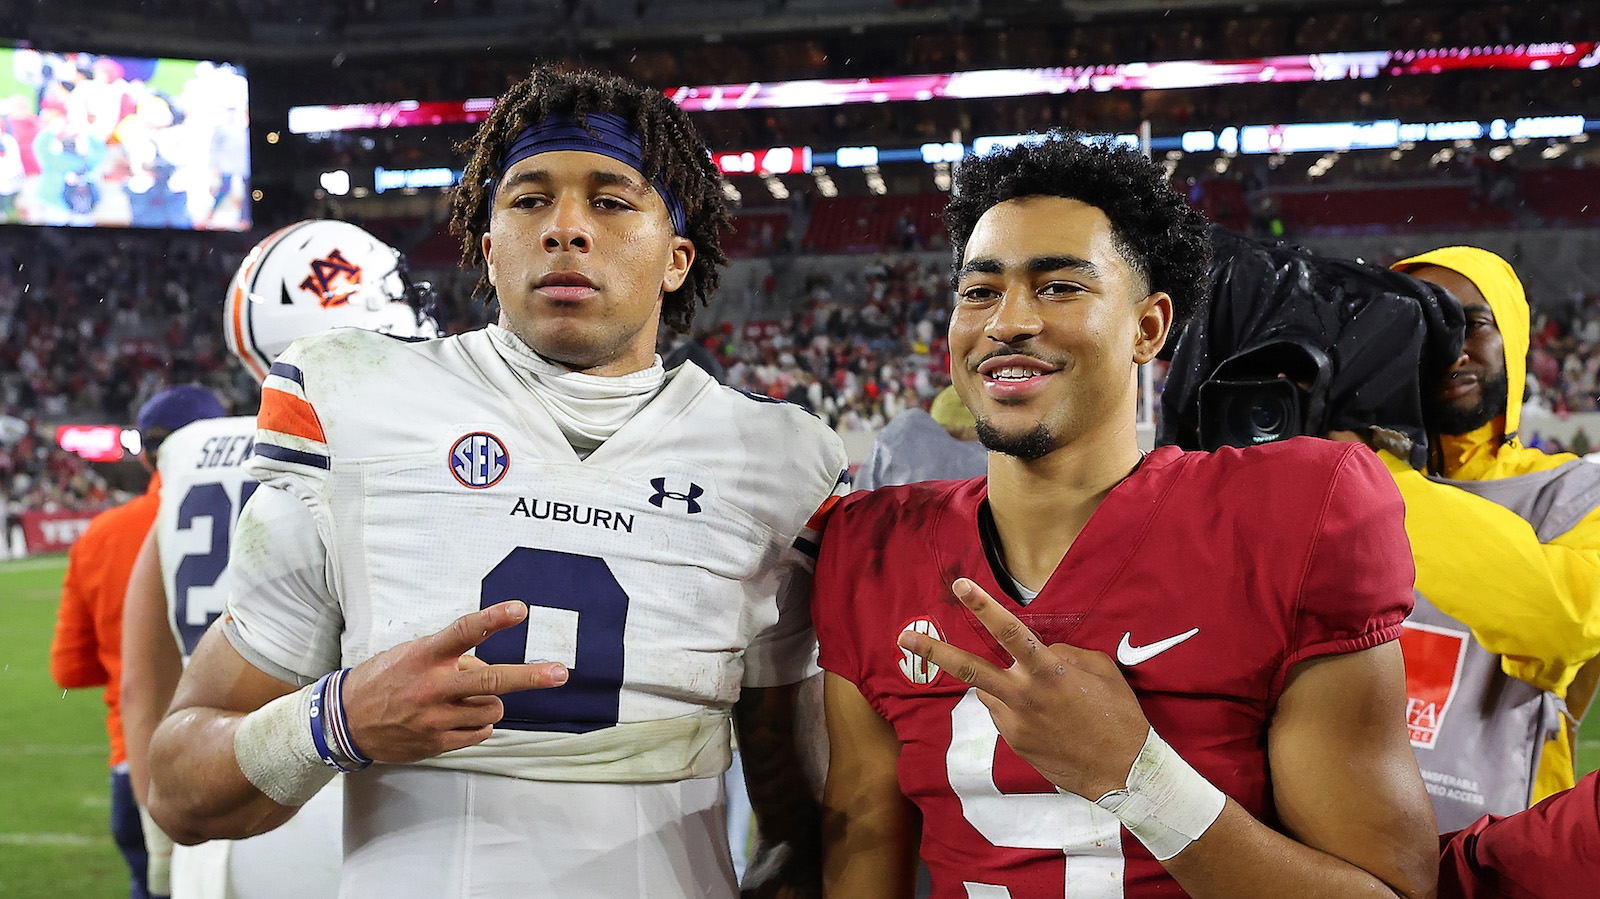 TUSCALOOSA, ALABAMA - NOVEMBER 26: Bryce Young #9 of the Alabama Crimson Tide and Robby Ashford #9 of the Auburn Tigers pose for a picture after the Crimson Tide's 49-27 win at Bryant-Denny Stadium on November 26, 2022 in Tuscaloosa, Alabama.